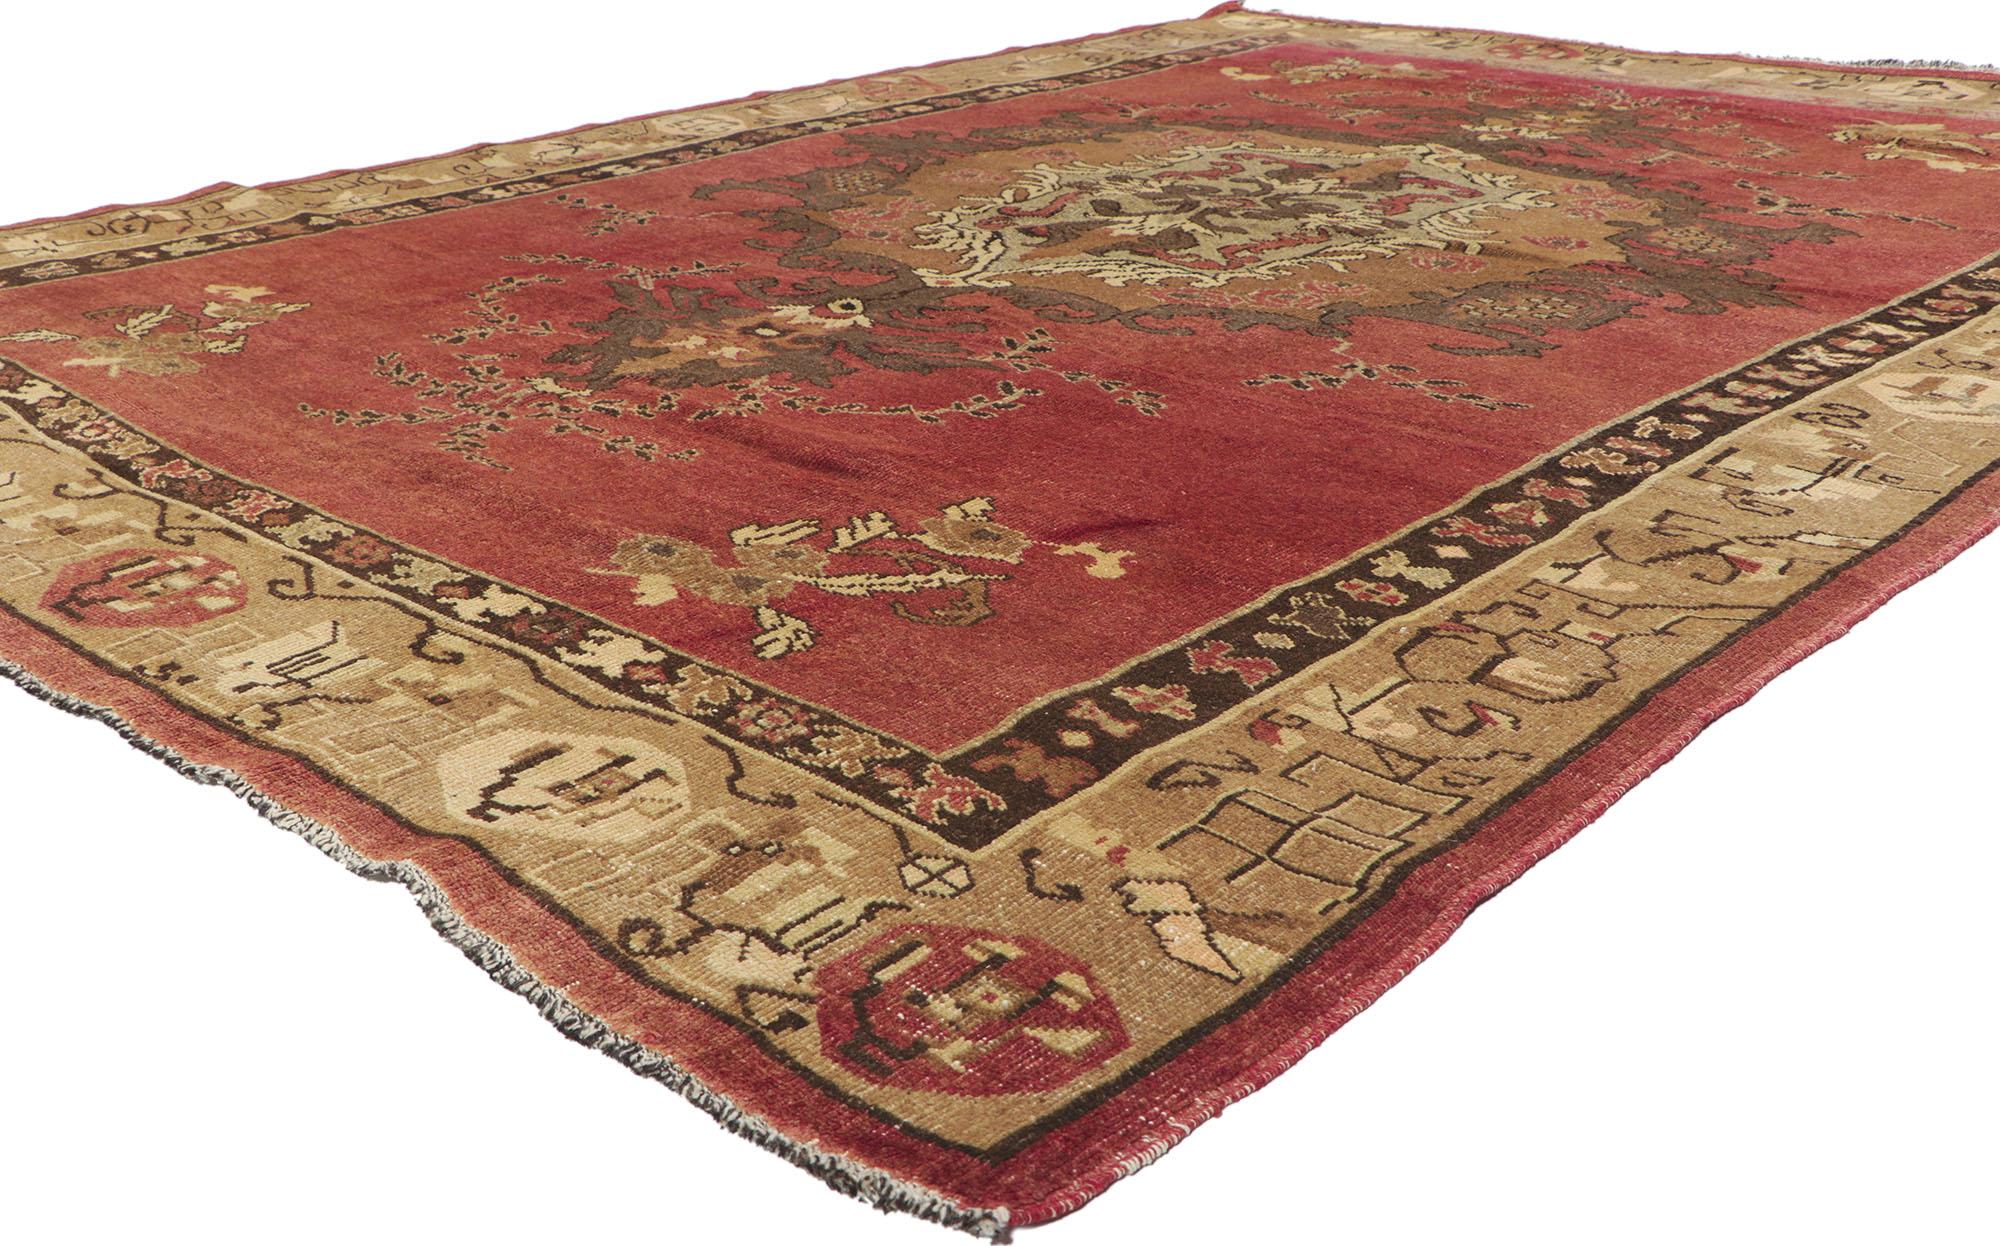 50500 Distressed Vintage Turkish Oushak rug with Rustic Artisan style. This hand knotted wool vintage Turkish Oushak rug features a large-scale medallion anchored with palmette pendants floating in an abrashed and weathered brick red field. The